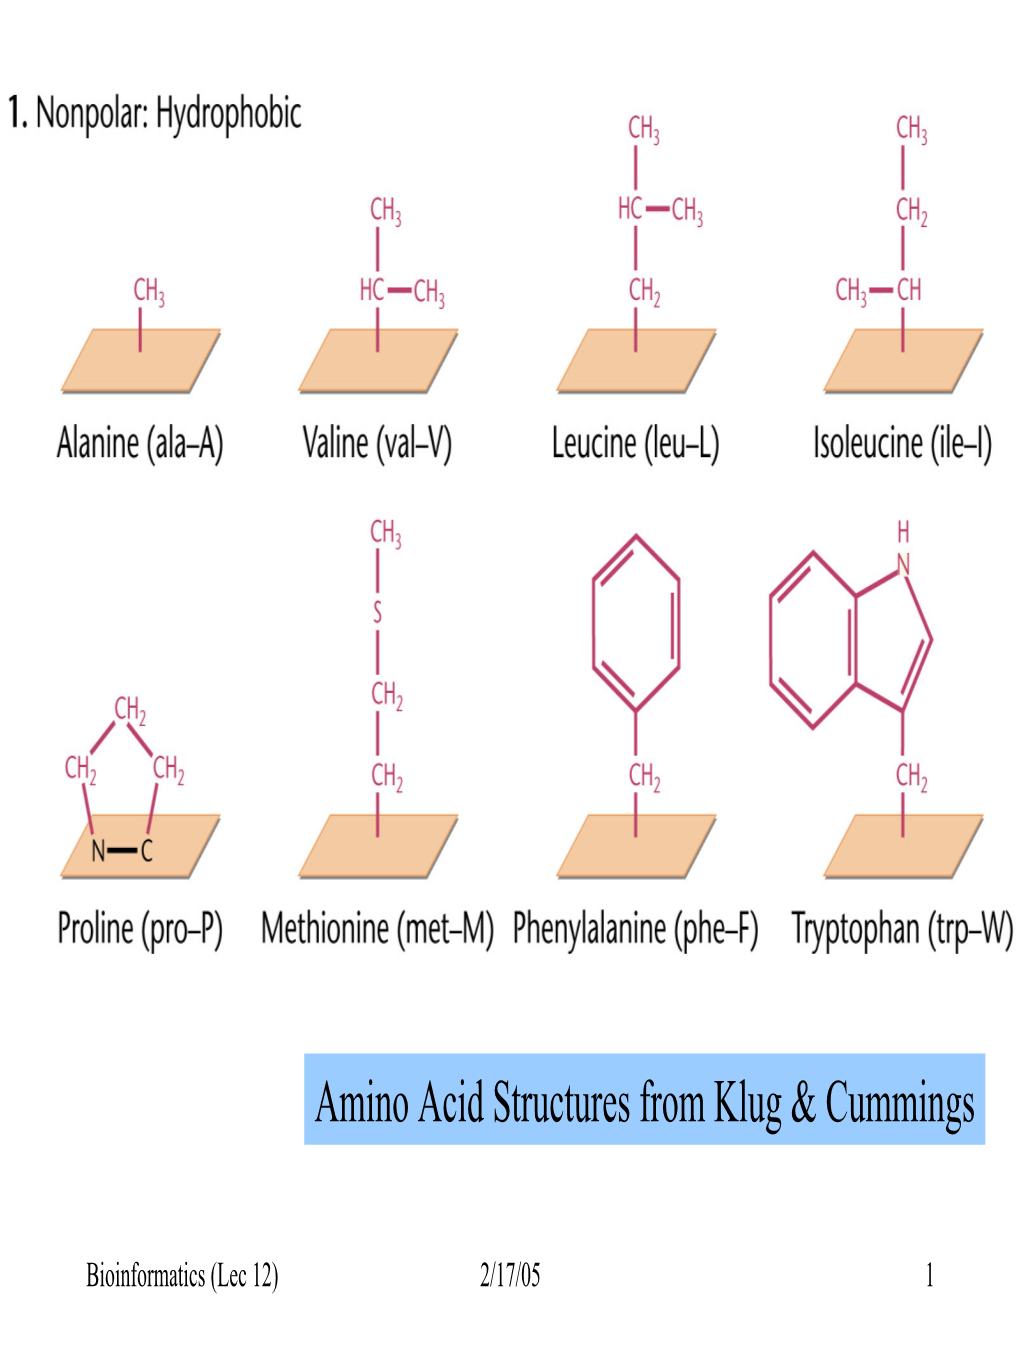 Amino Acid Structures from Klug & Cummings